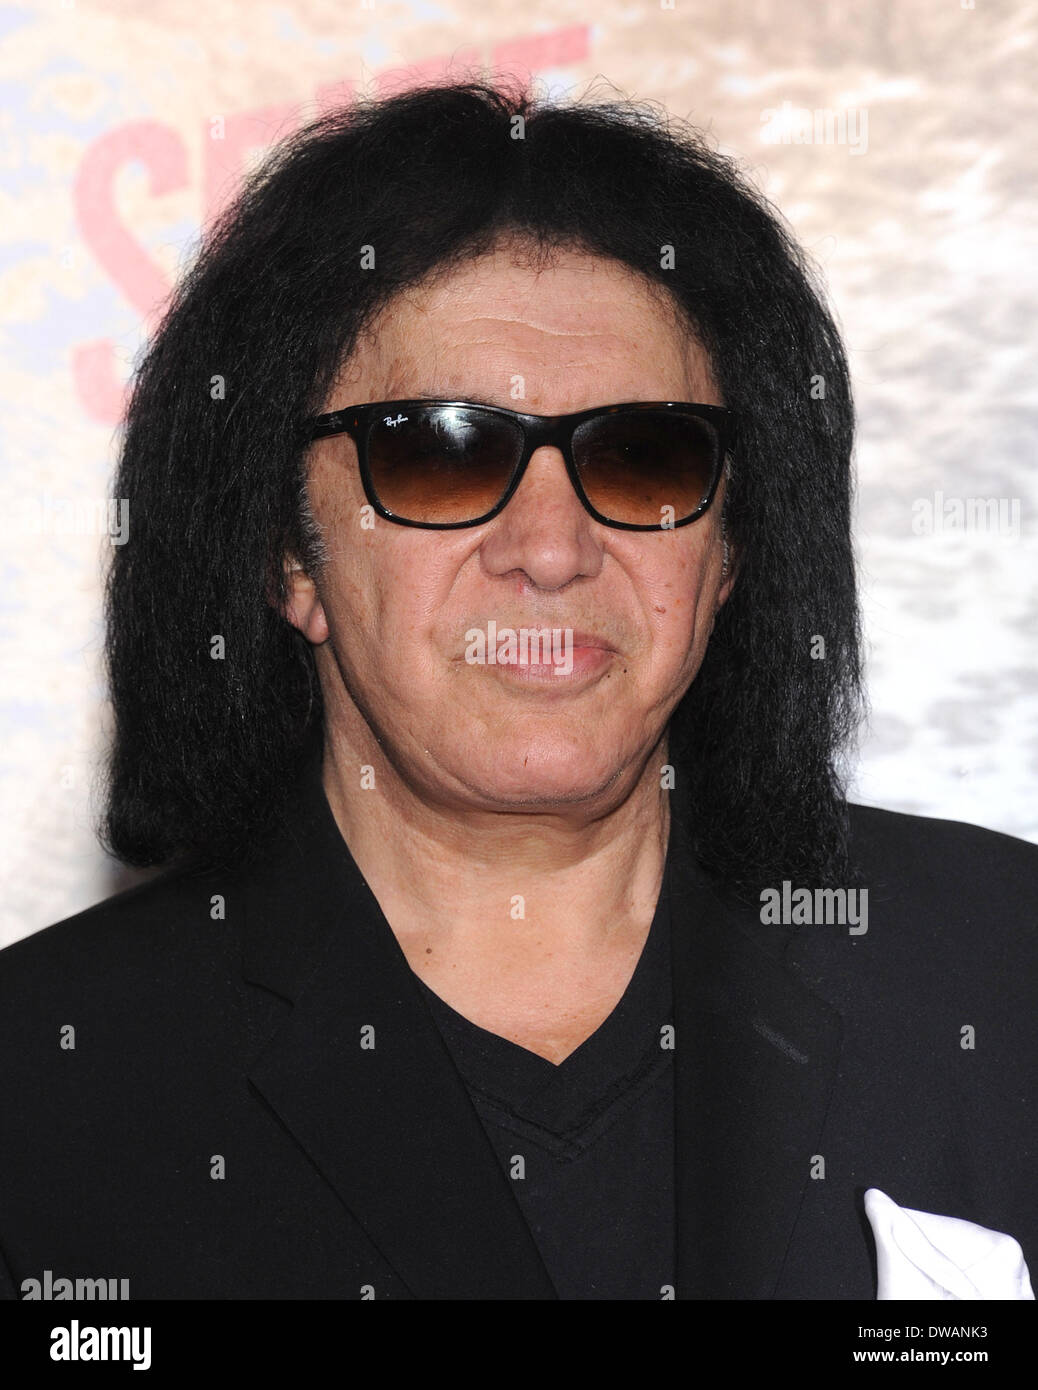 Hollywood, California, USA. 4th Mar, 2014. Gene Simmons arrives for the premiere of the film '300: Rise Of An Empire' at the Chinese theater. Credit:  Lisa O'Connor/ZUMAPRESS.com/Alamy Live News Stock Photo